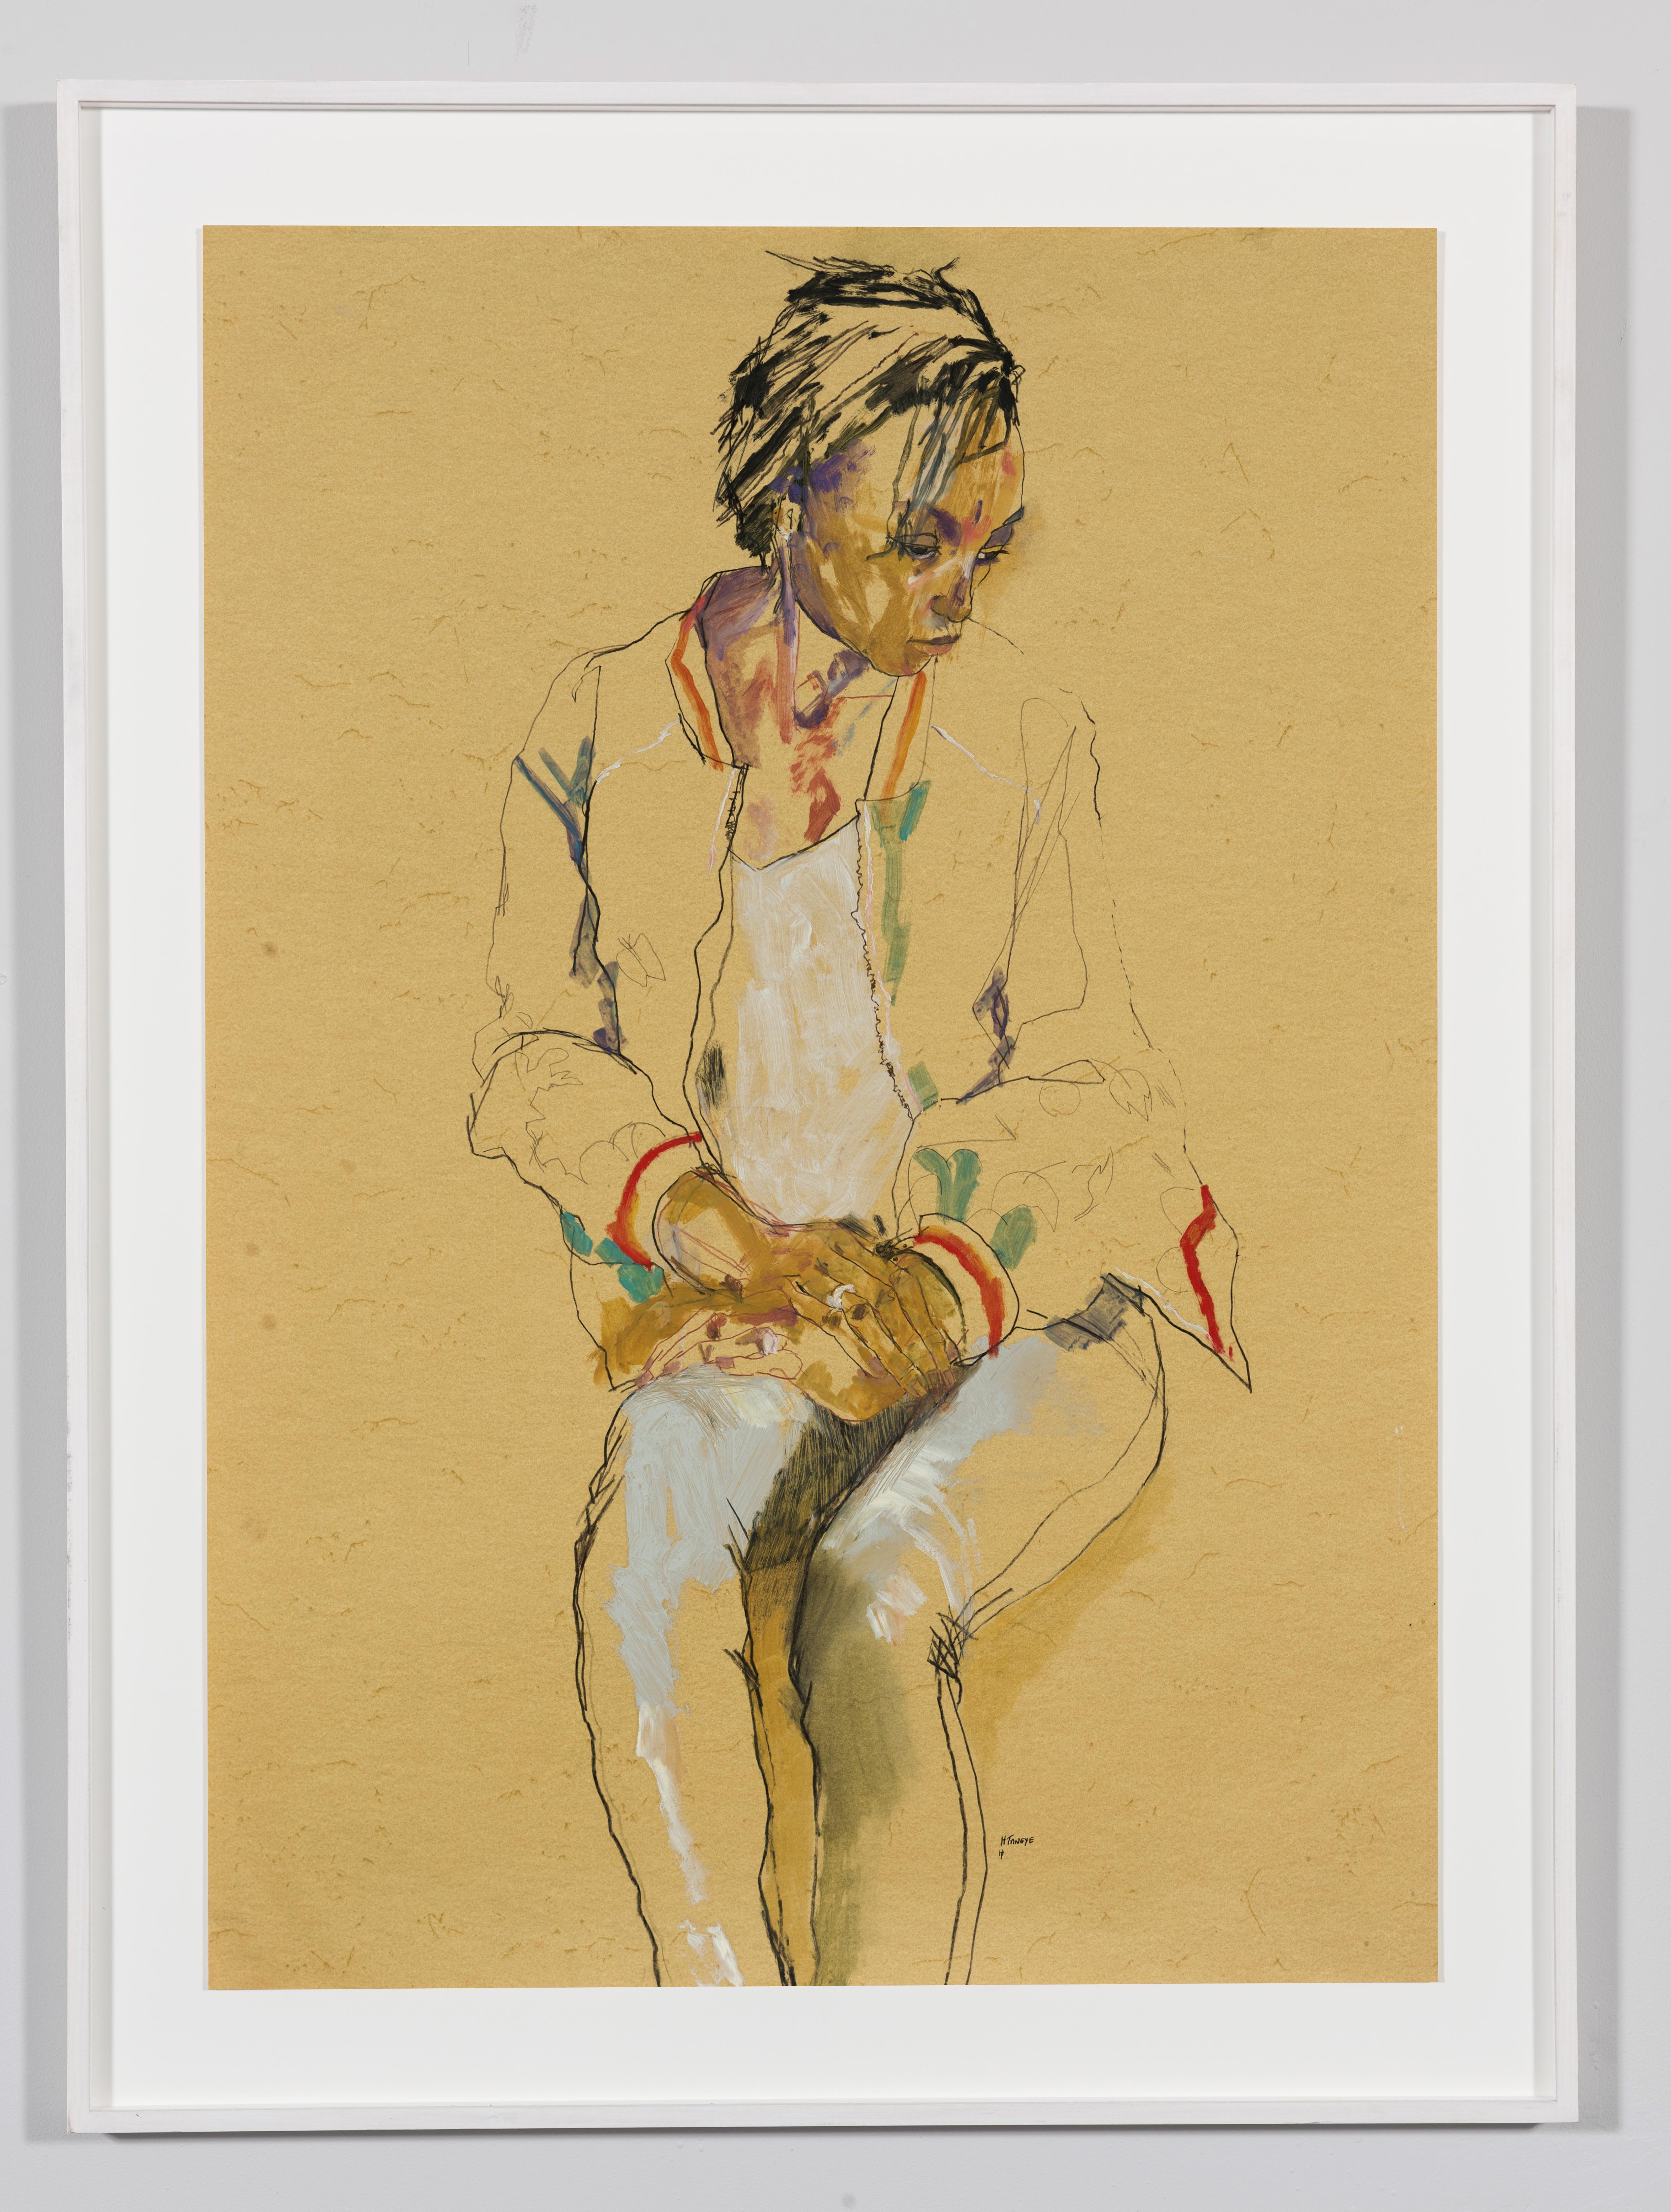 Anji (Seated, Hands in Lap, Looking Away), Mixed media on ochre paper - Art by Howard Tangye